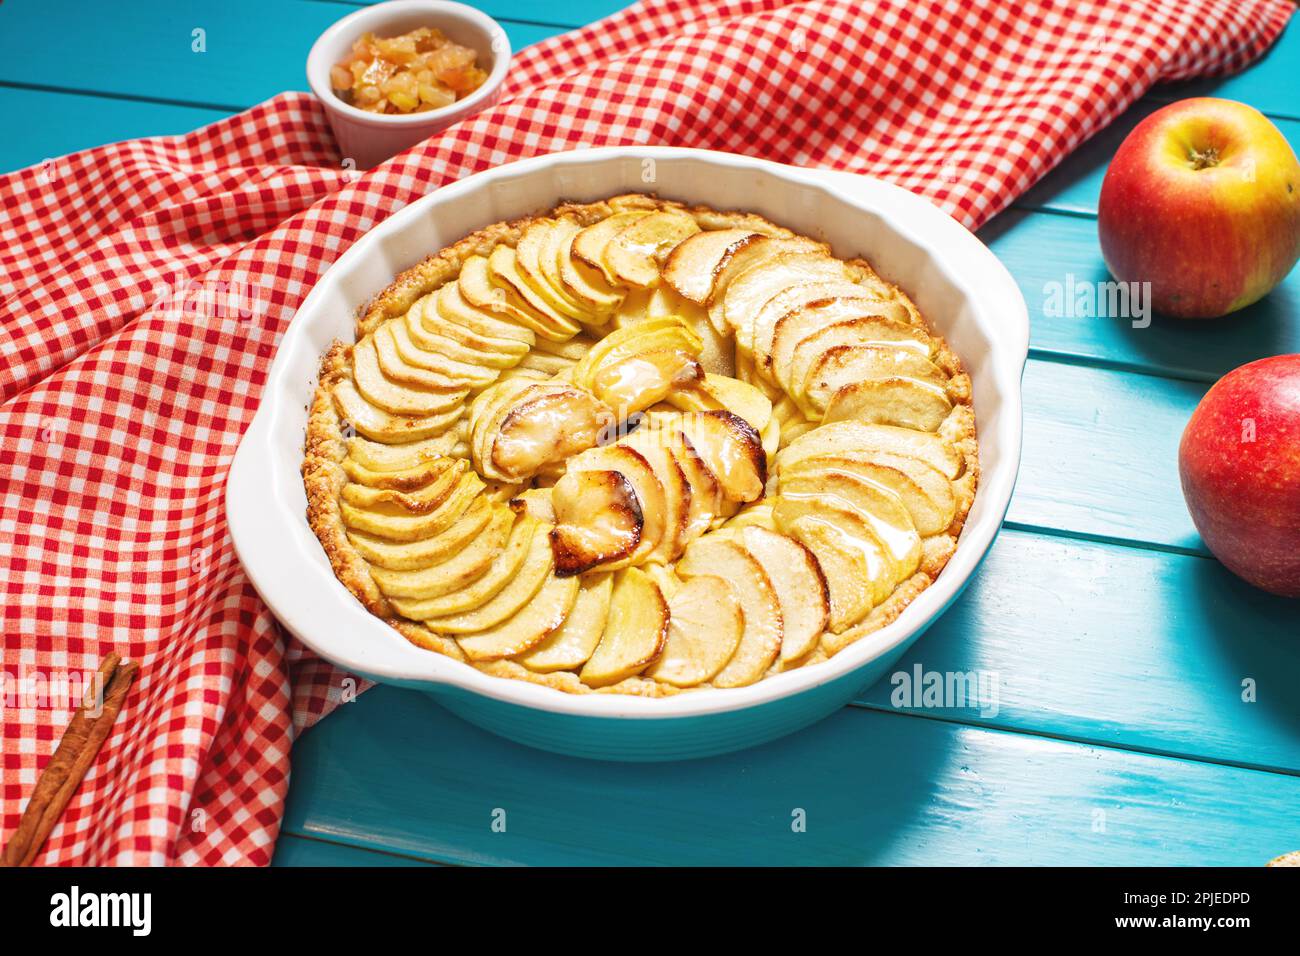 Homemade delicious fresh baked rustic apple pie on blue wooden background. Stock Photo